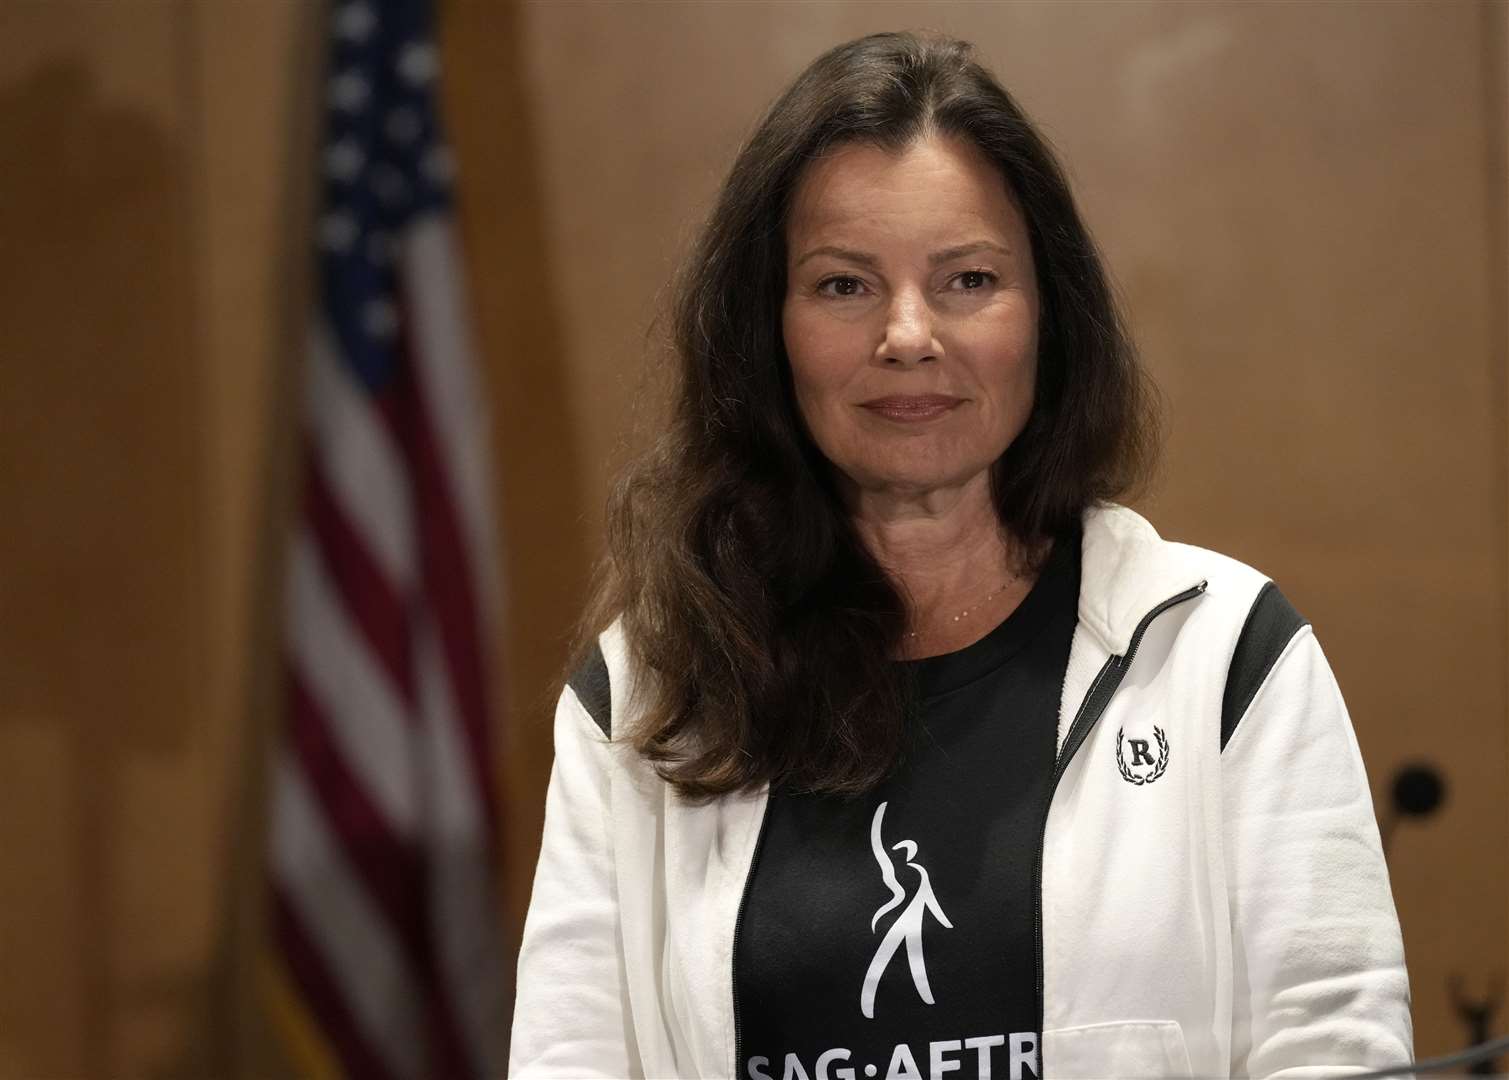 SAG-AFTRA president Fran Drescher speaks during a press conference announcing a strike by The Screen Actors Guild-American Federation of Television and Radio Artists (Chris Pizzello/PA)